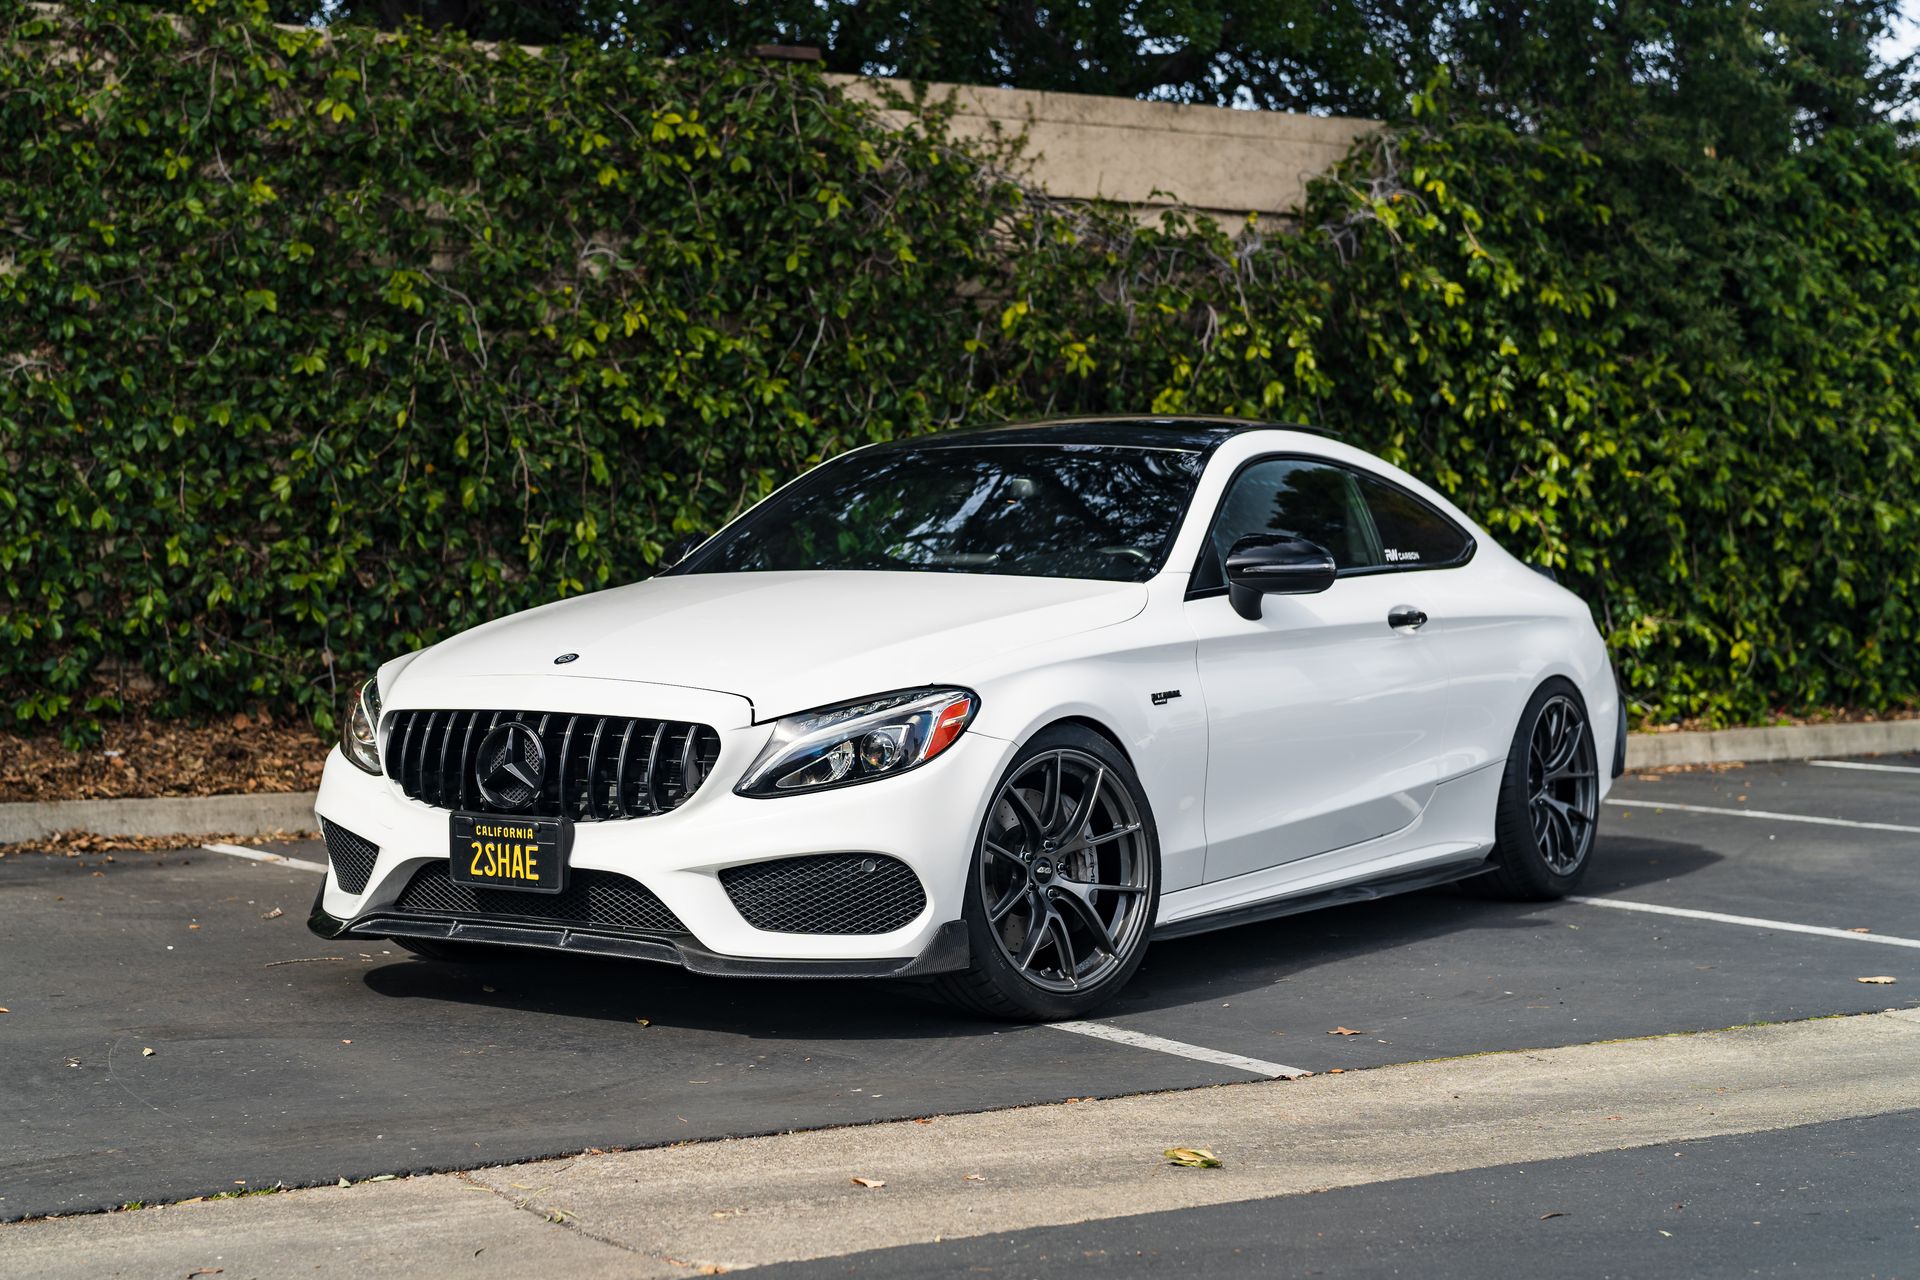 Mercedes-Benz BR205 C-Class AMG with 19" VS-5RS in Anthracite